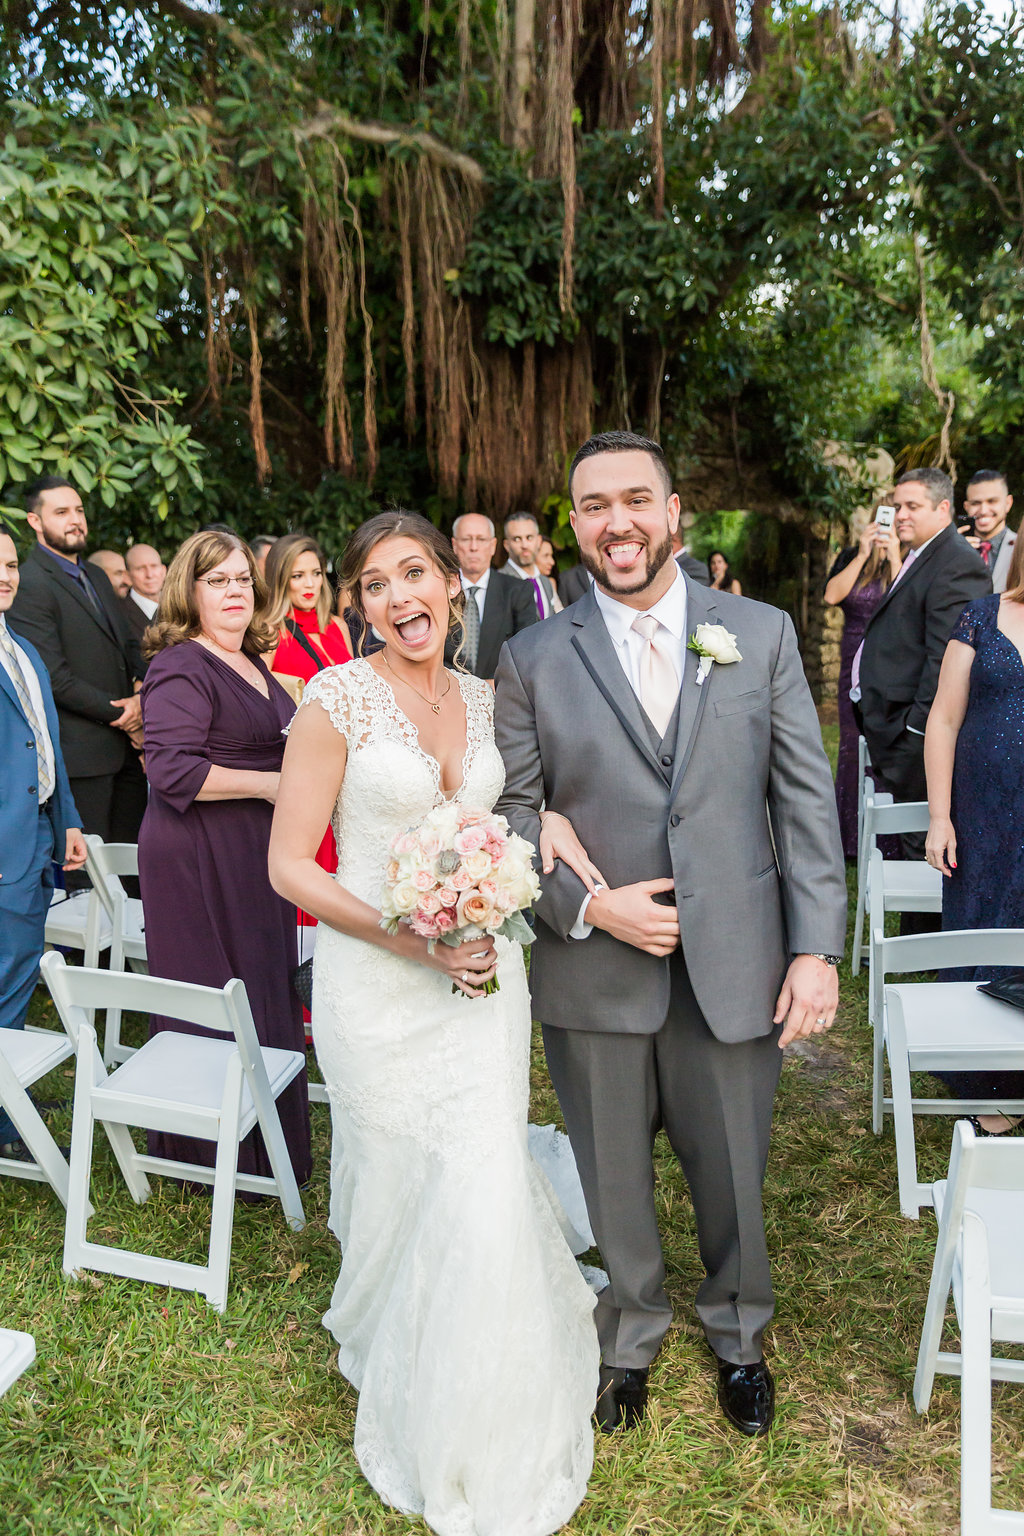 The bride and groom make funny faces after the ceremony reflecting their true personalities